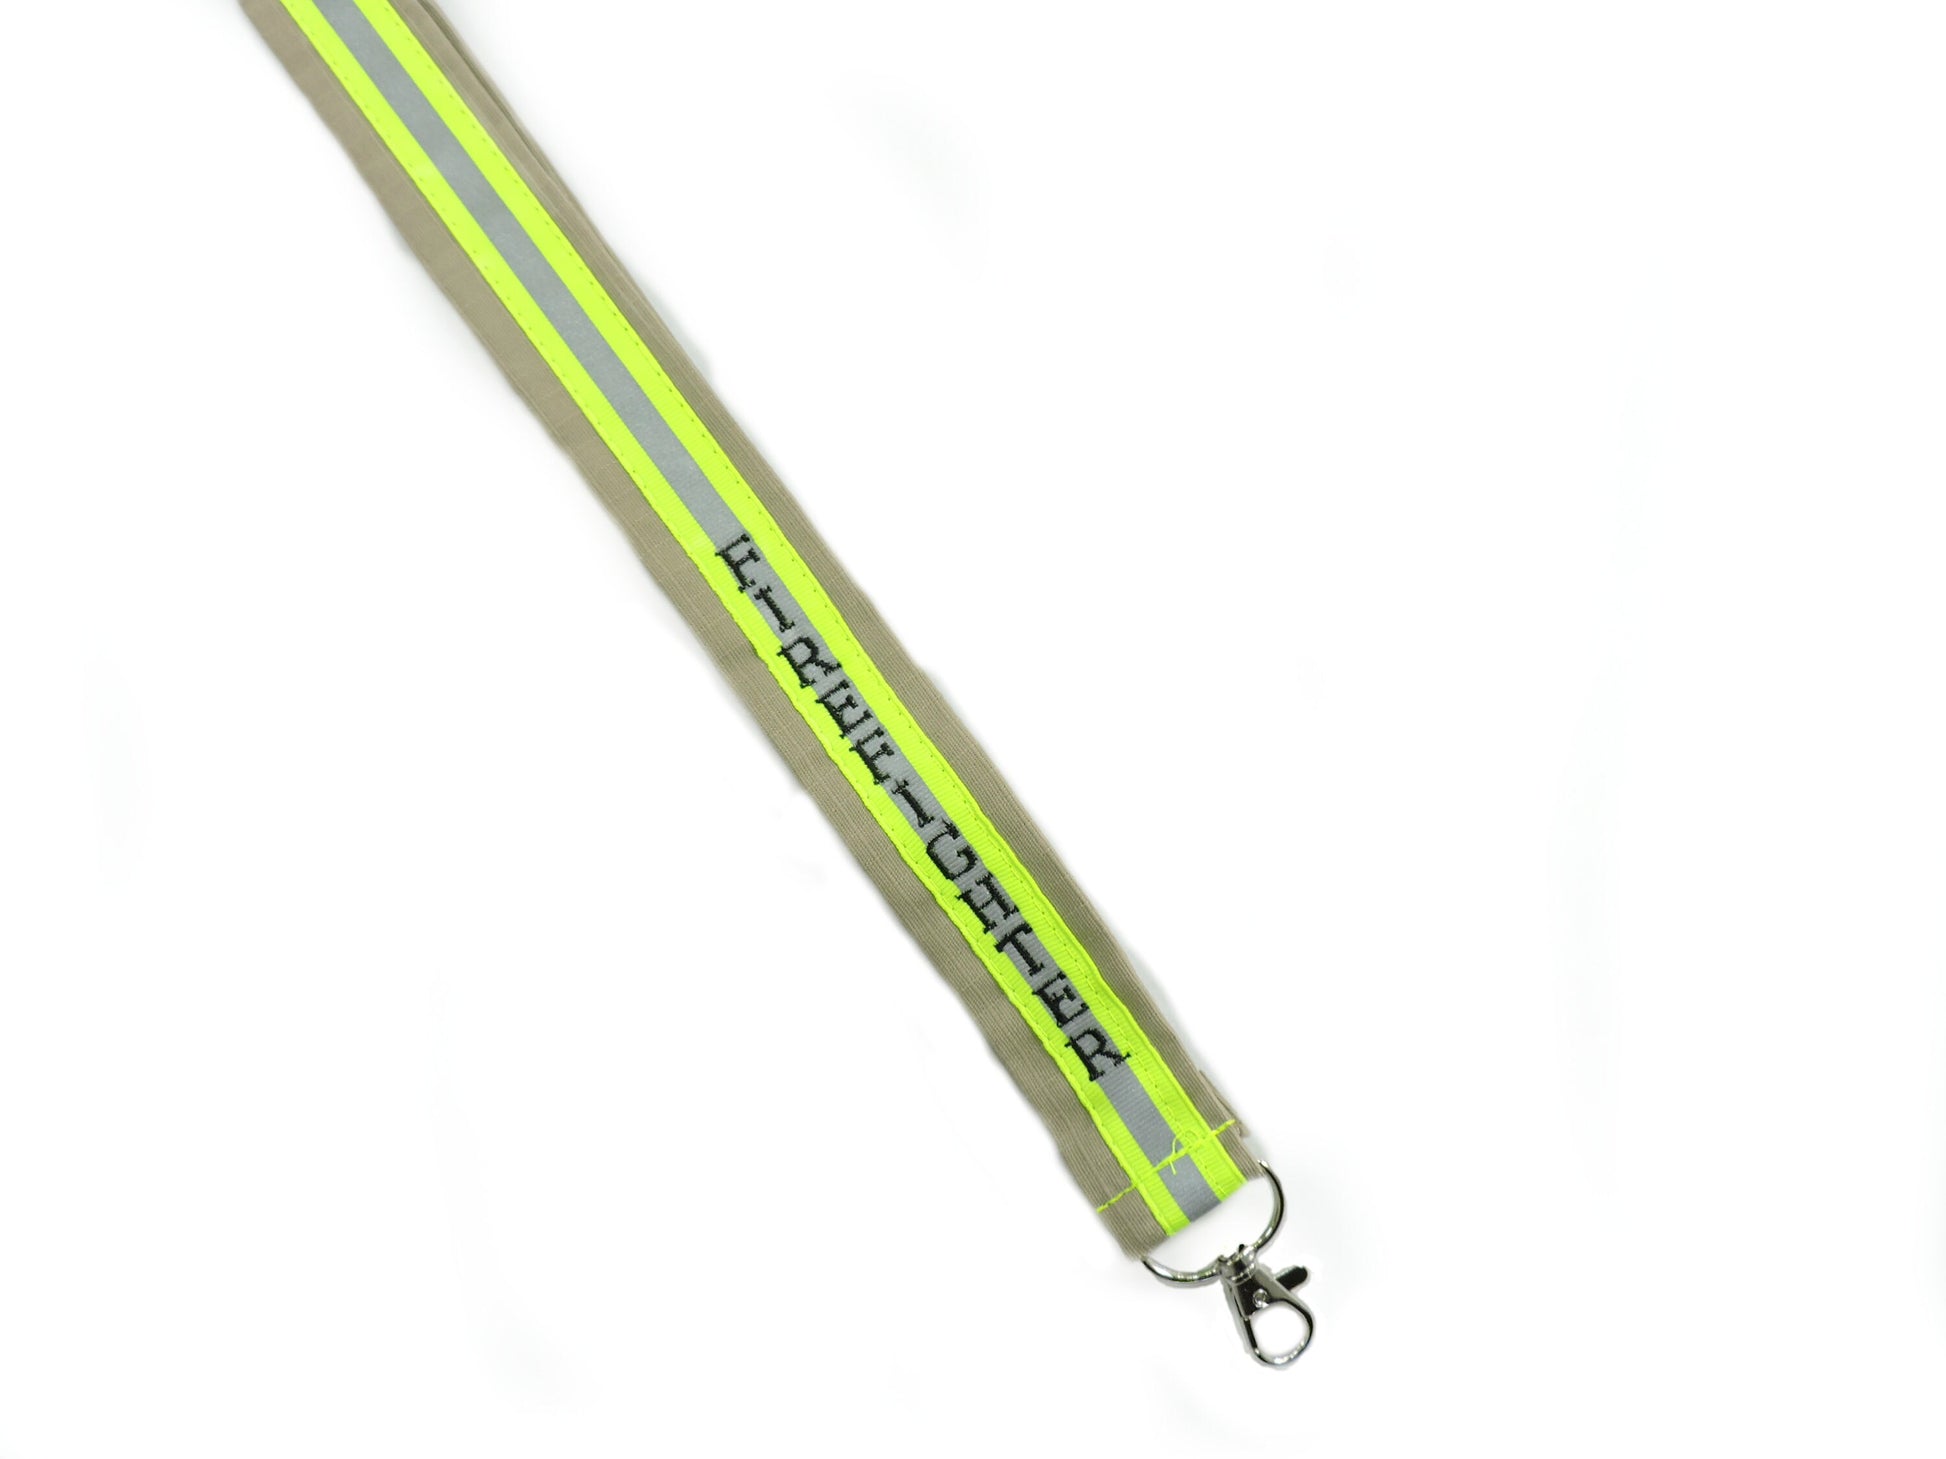 Tan fabric with neon yellow reflective tape with a name added firefighter lanyard 